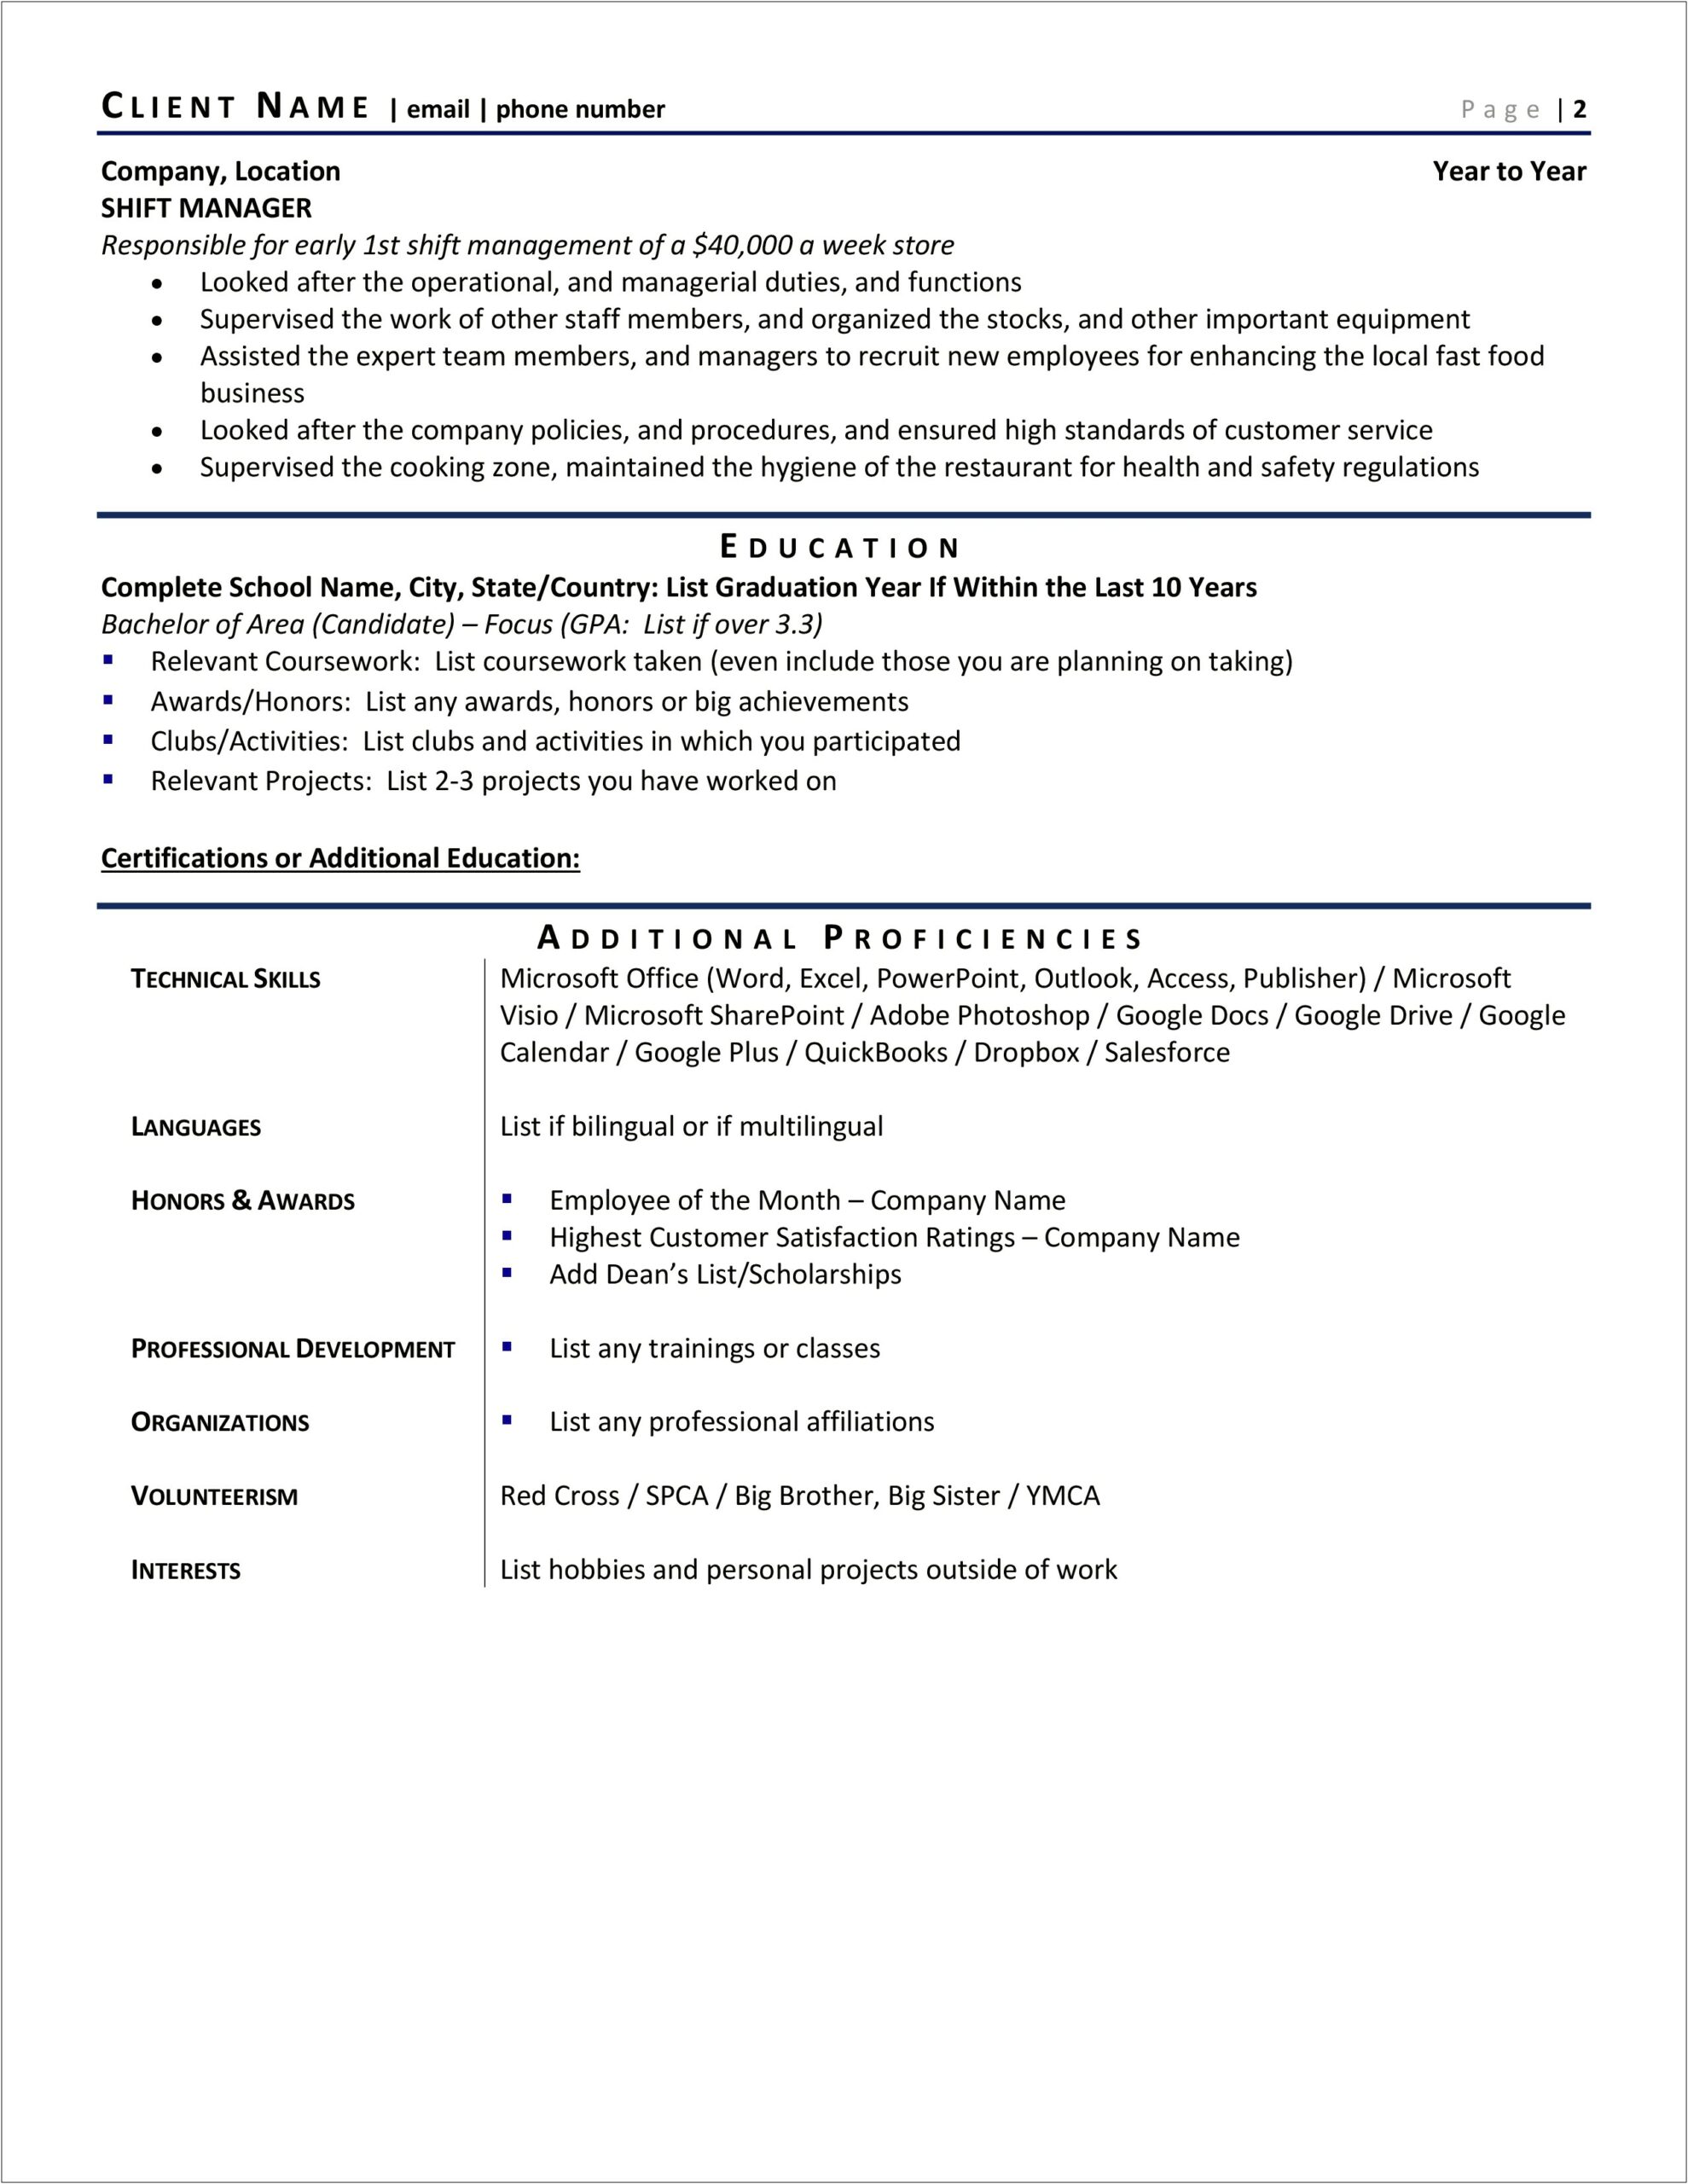 Resume Should I Only List Professional Experience